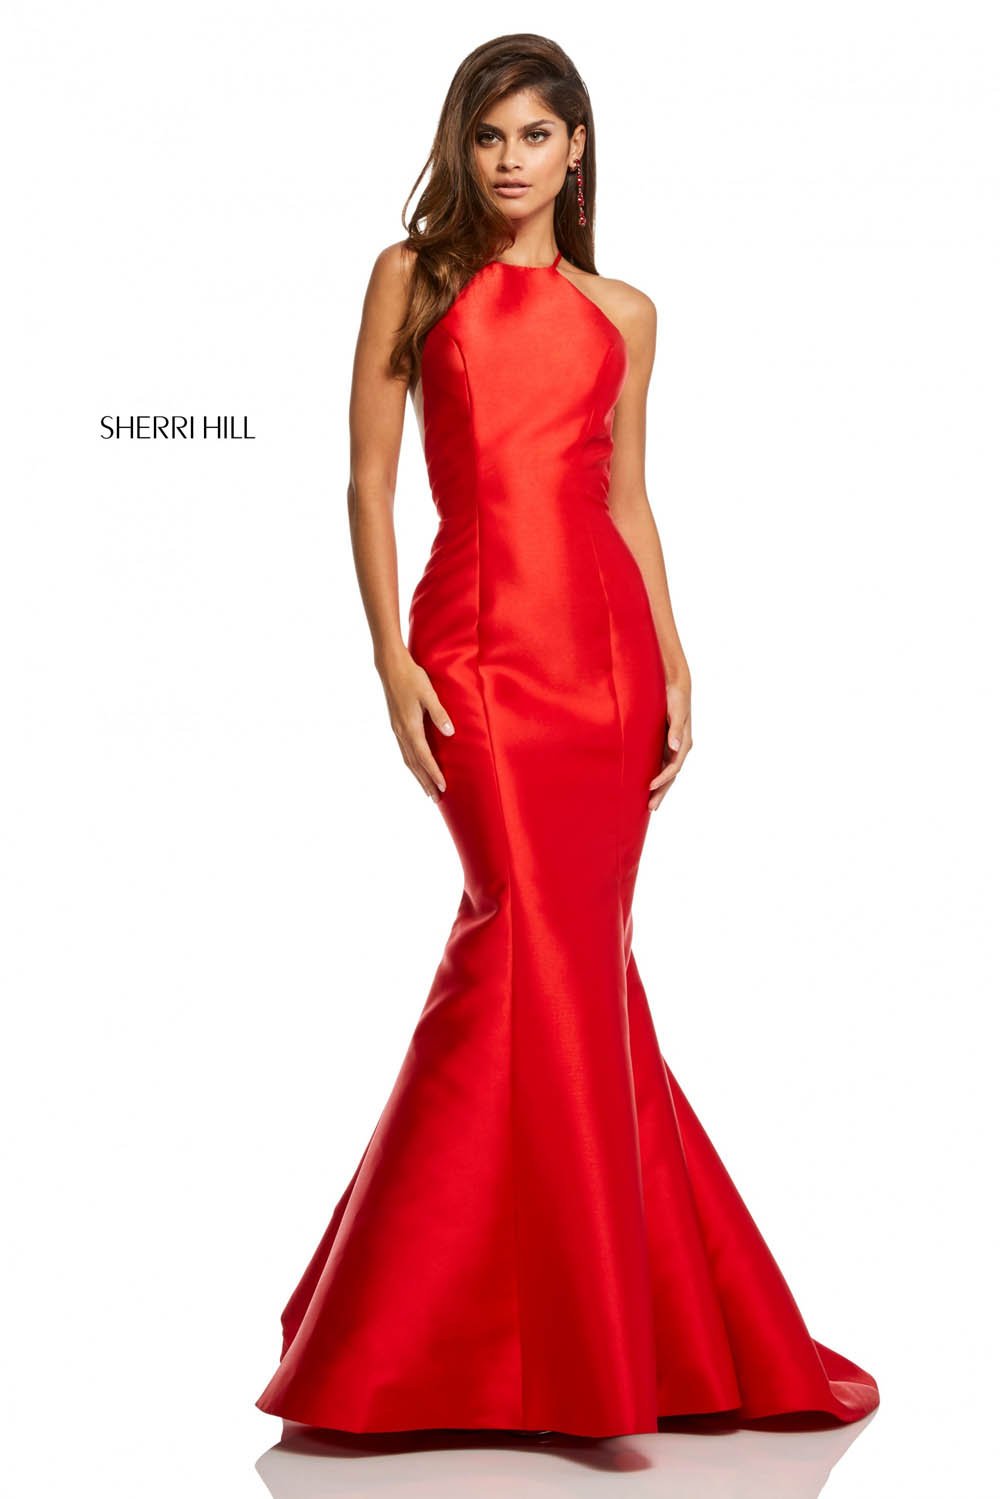 Sherri Hill 52575 dress images in these colors: Red, Black, Yellow, Light Blue, Light Pink, Ivory.